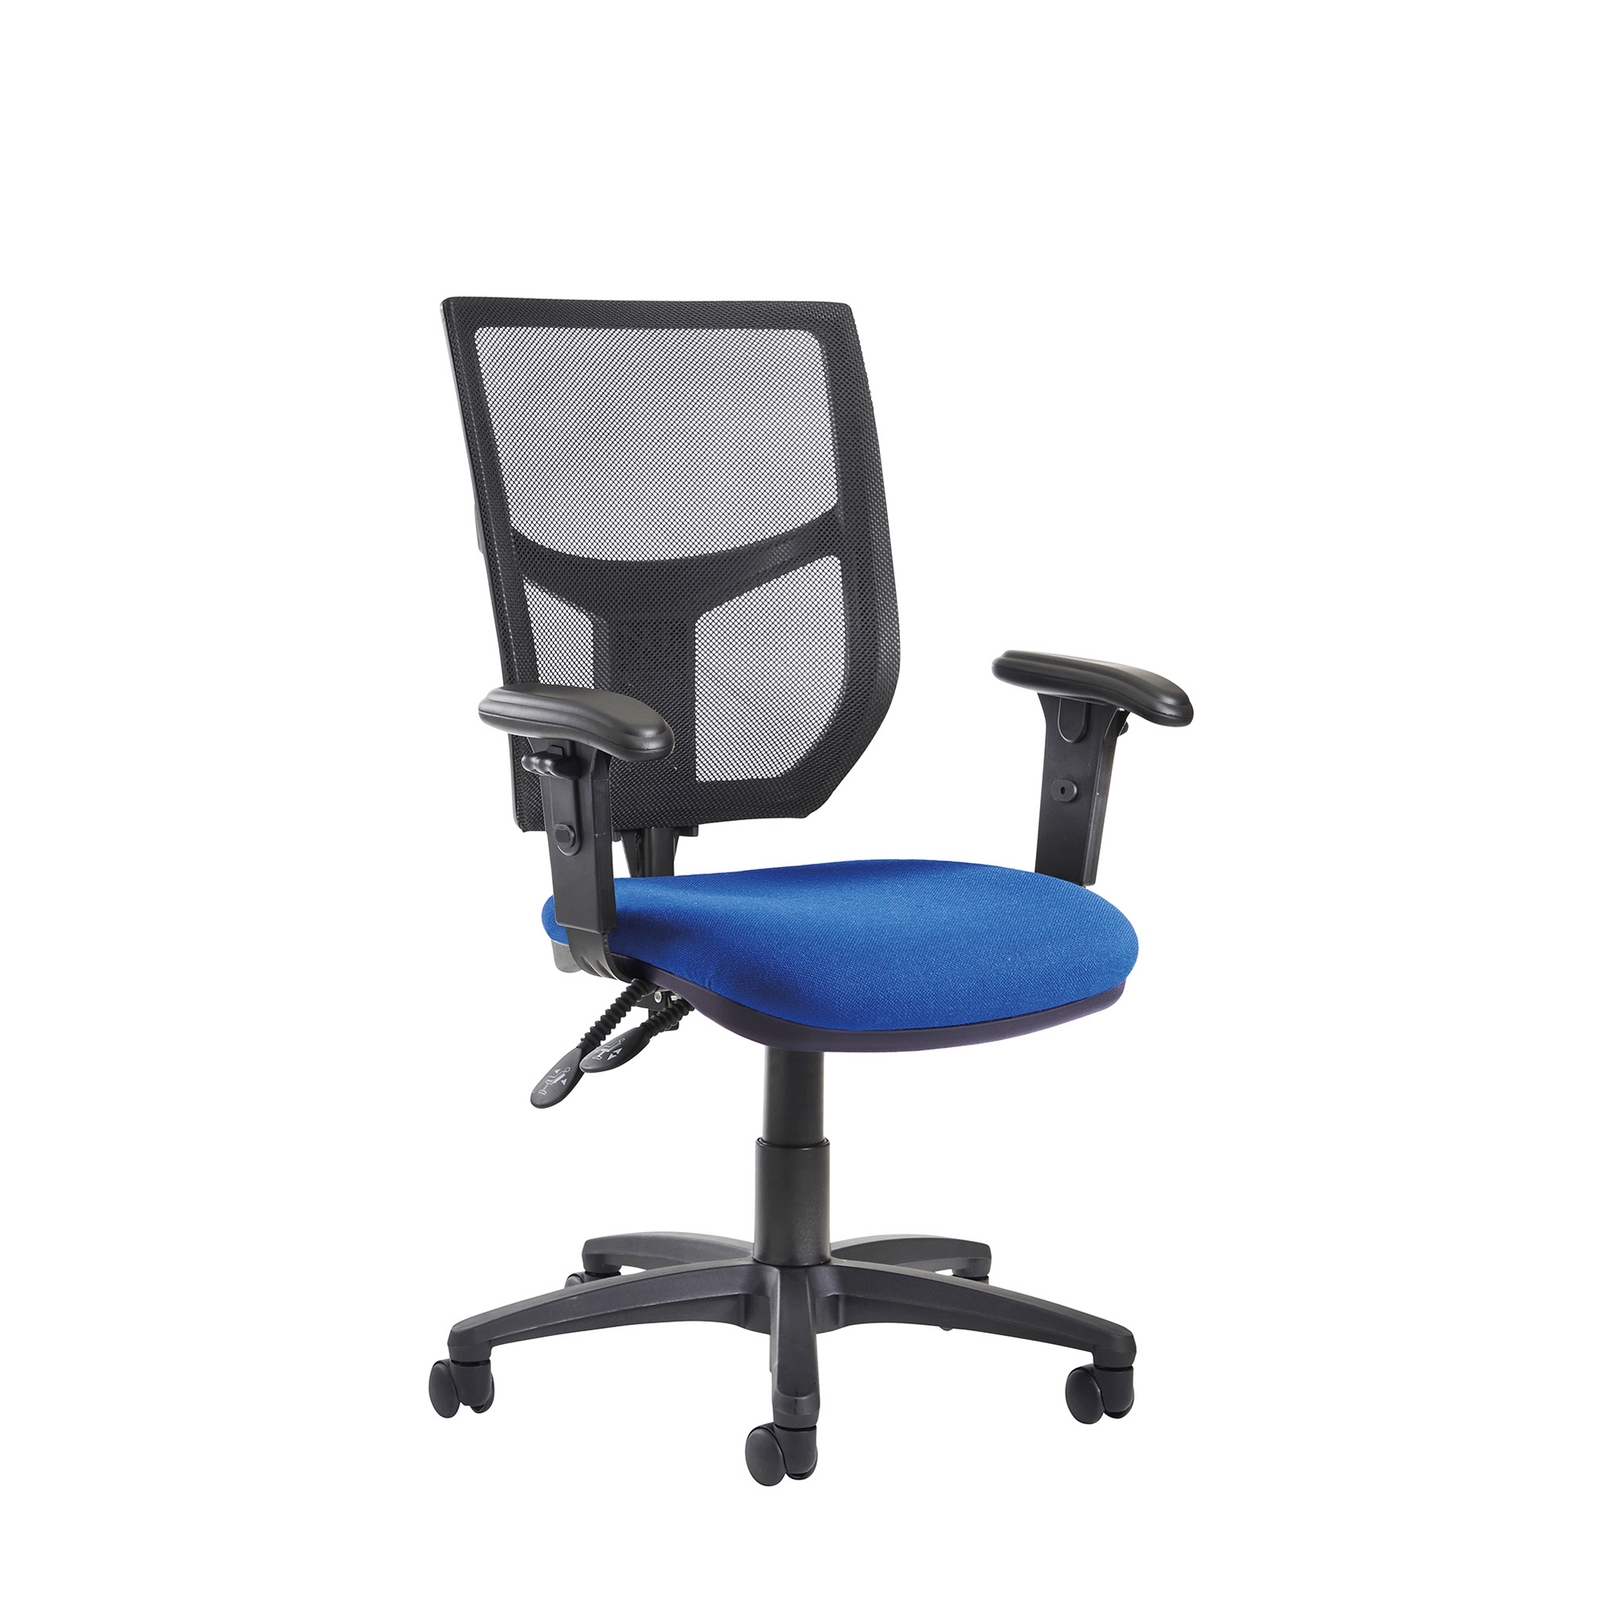 Altino High Back Operator's Chair Adjustable Arms - Blue